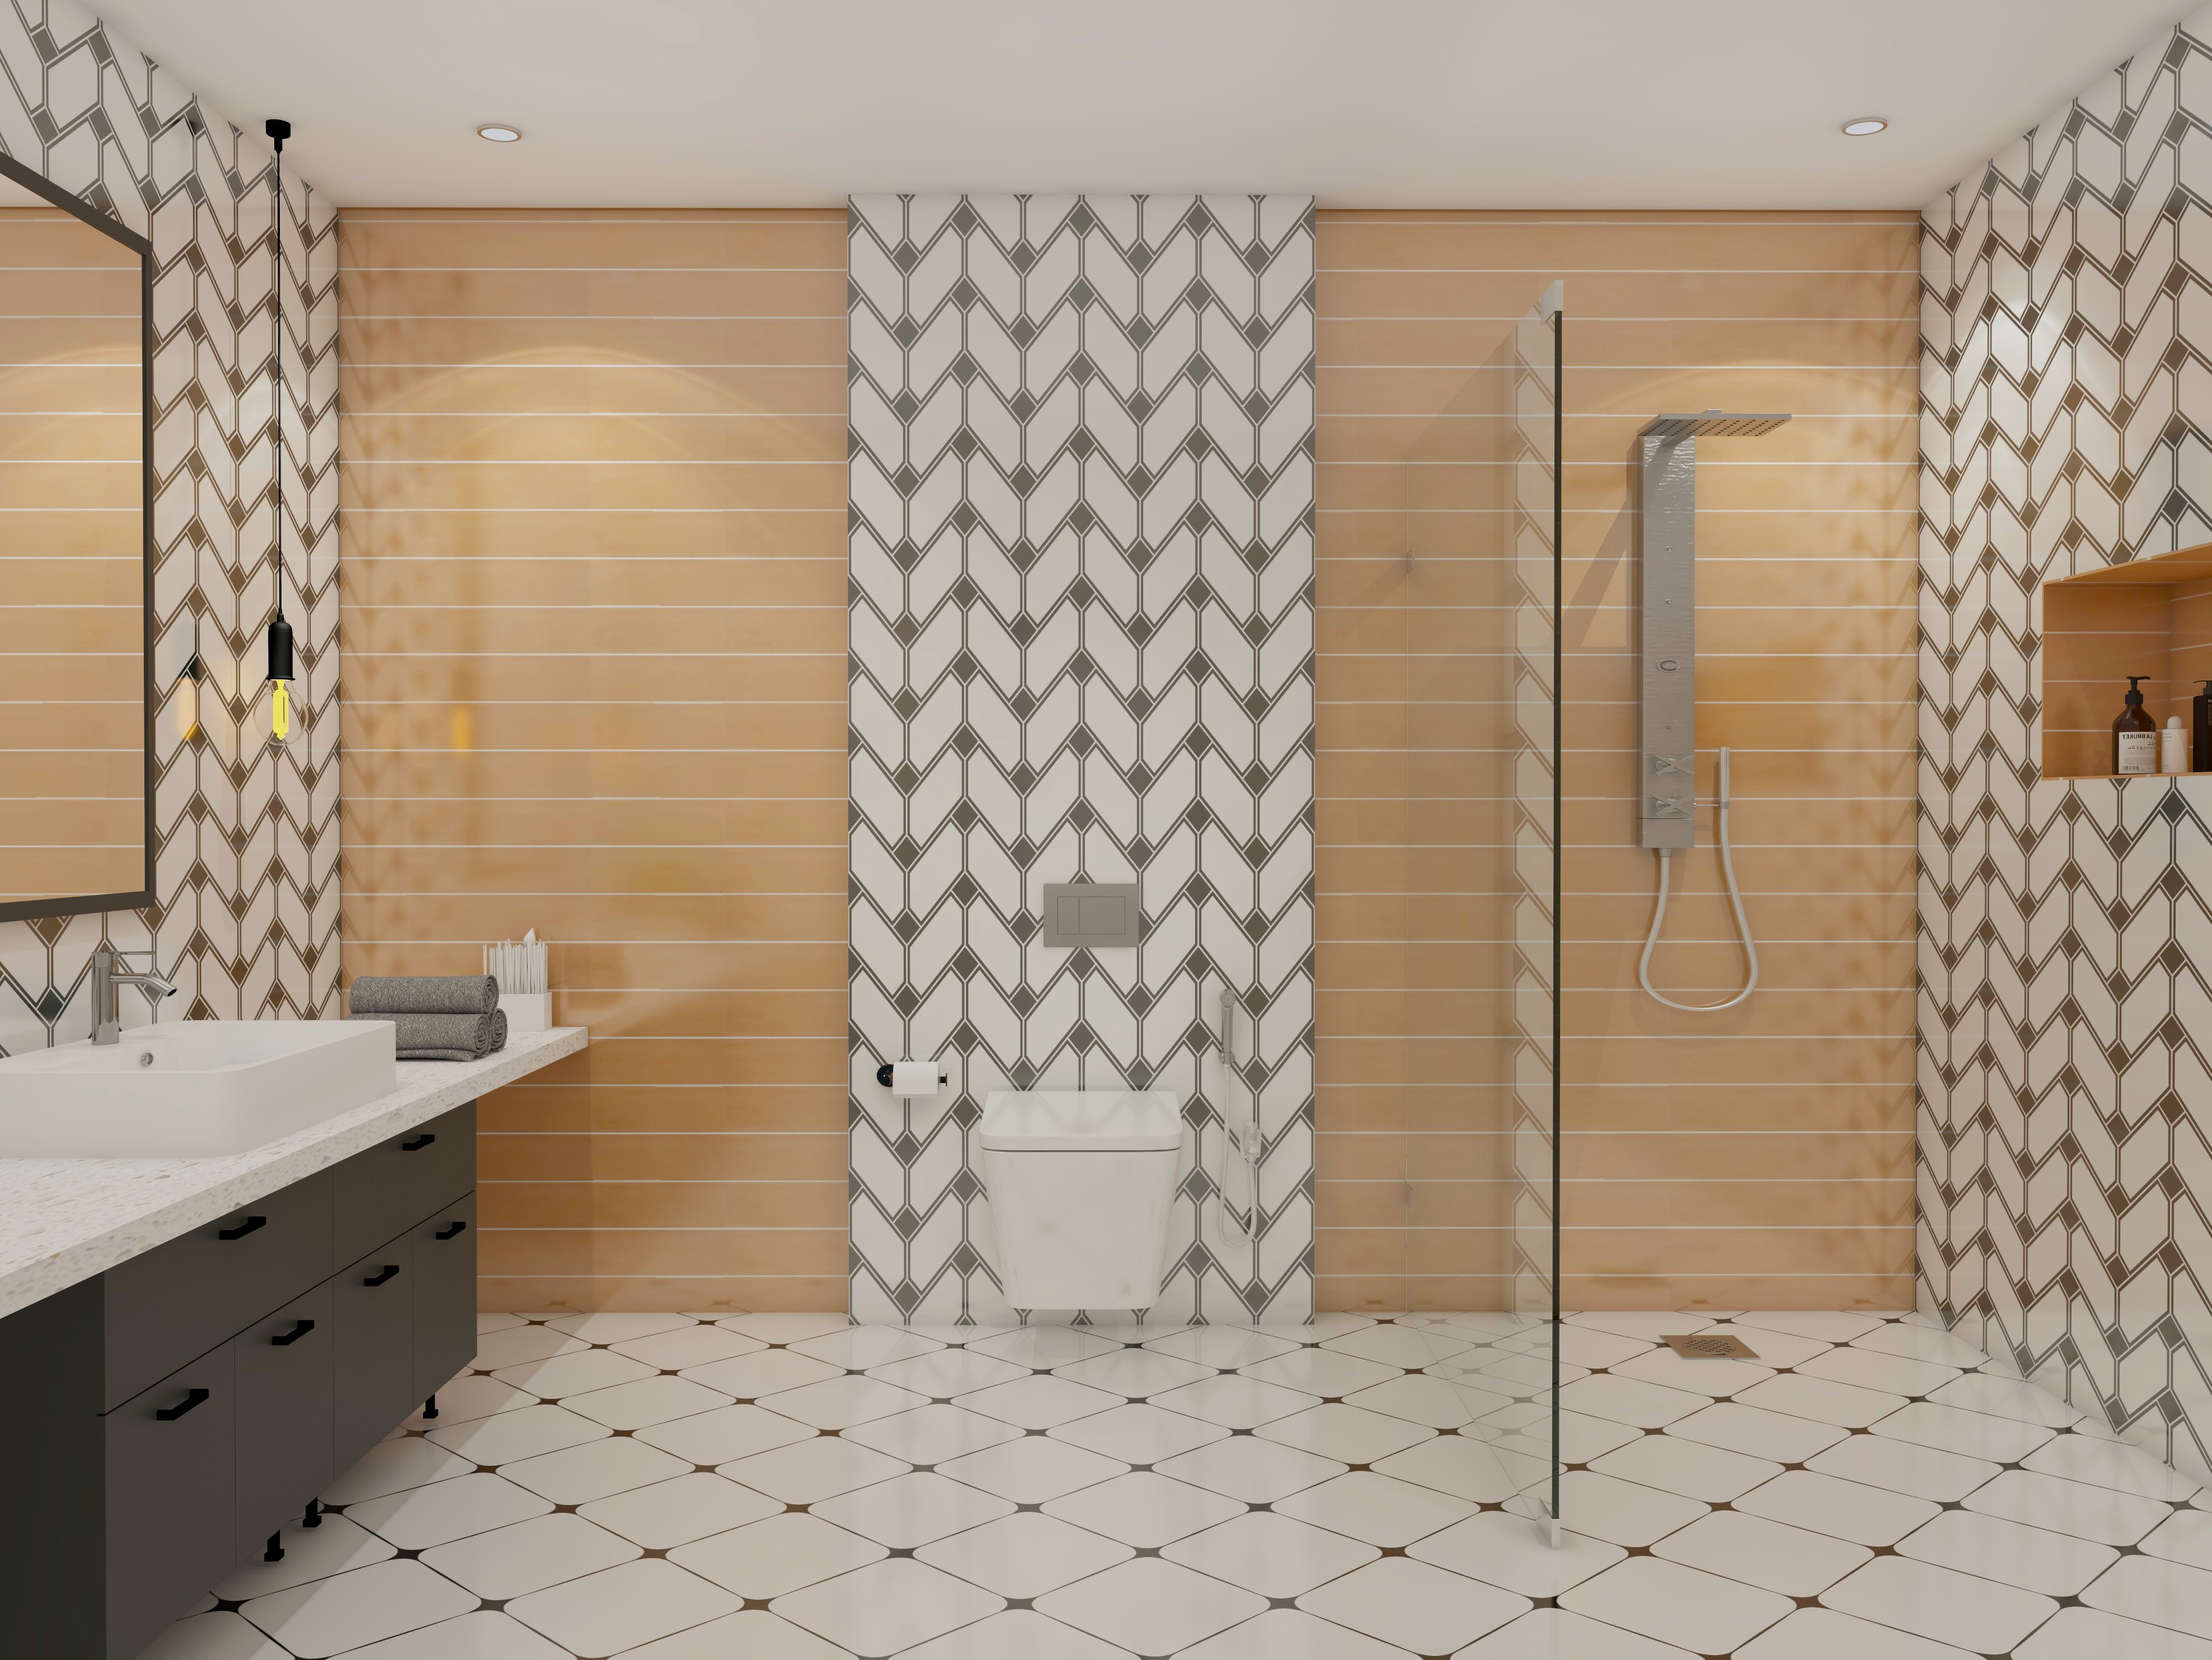 Bathroom with herringbone patterned tiles and light brown tiles - Beautiful Homes